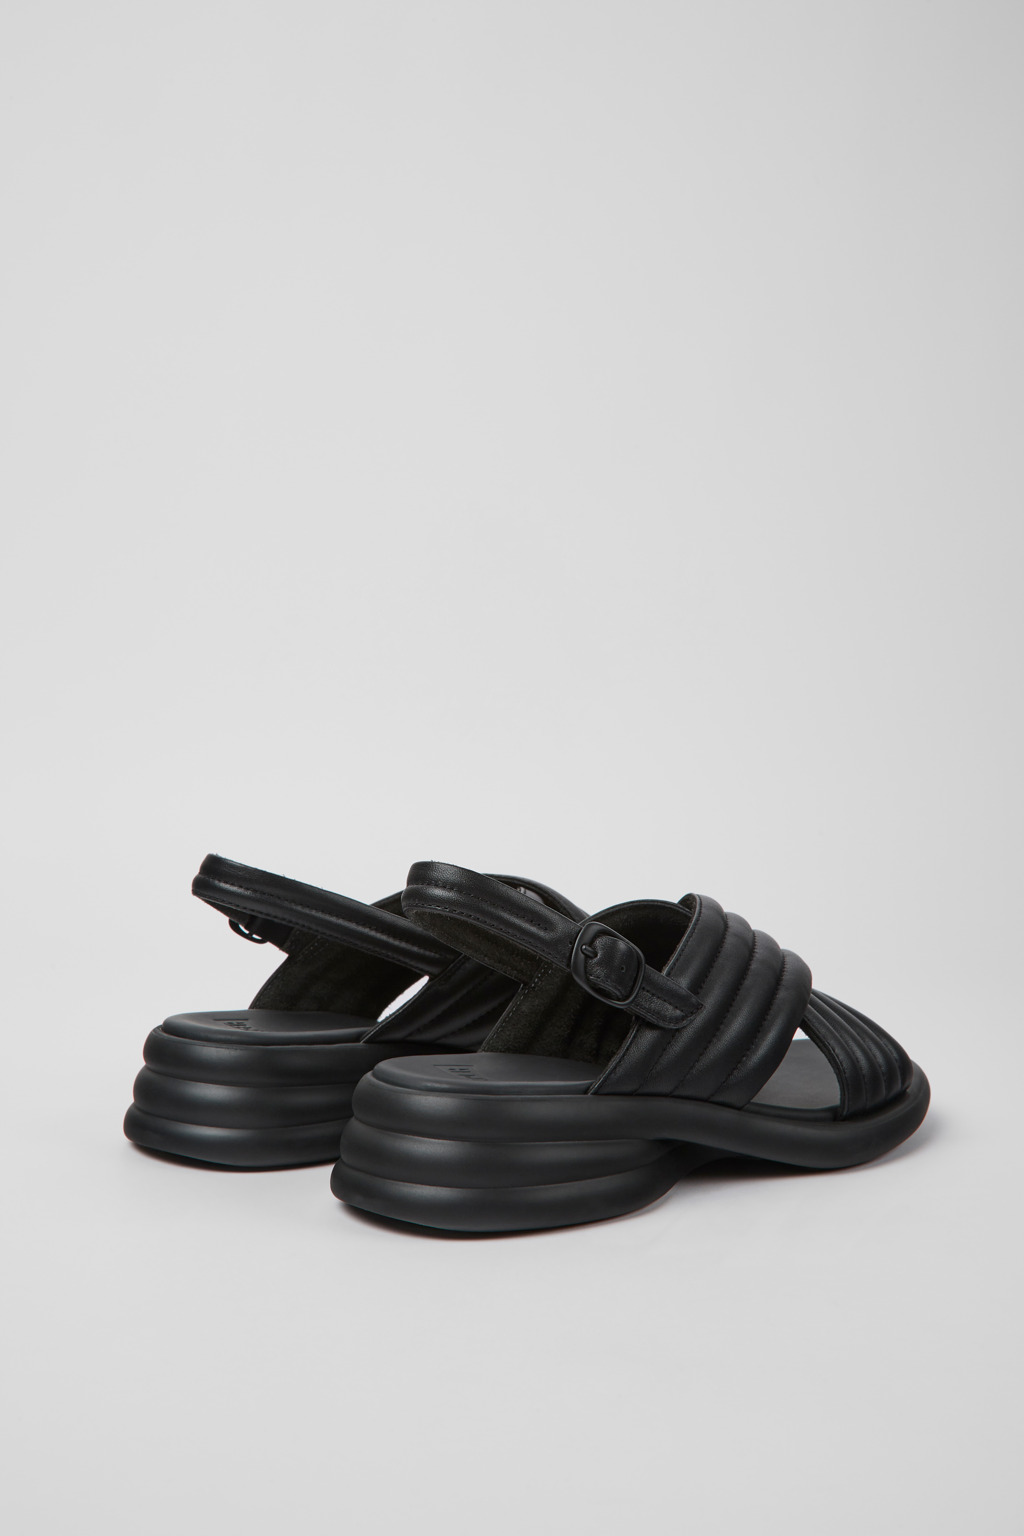 GIG Black Sandals for Women - Fall/Winter collection - Camper USA